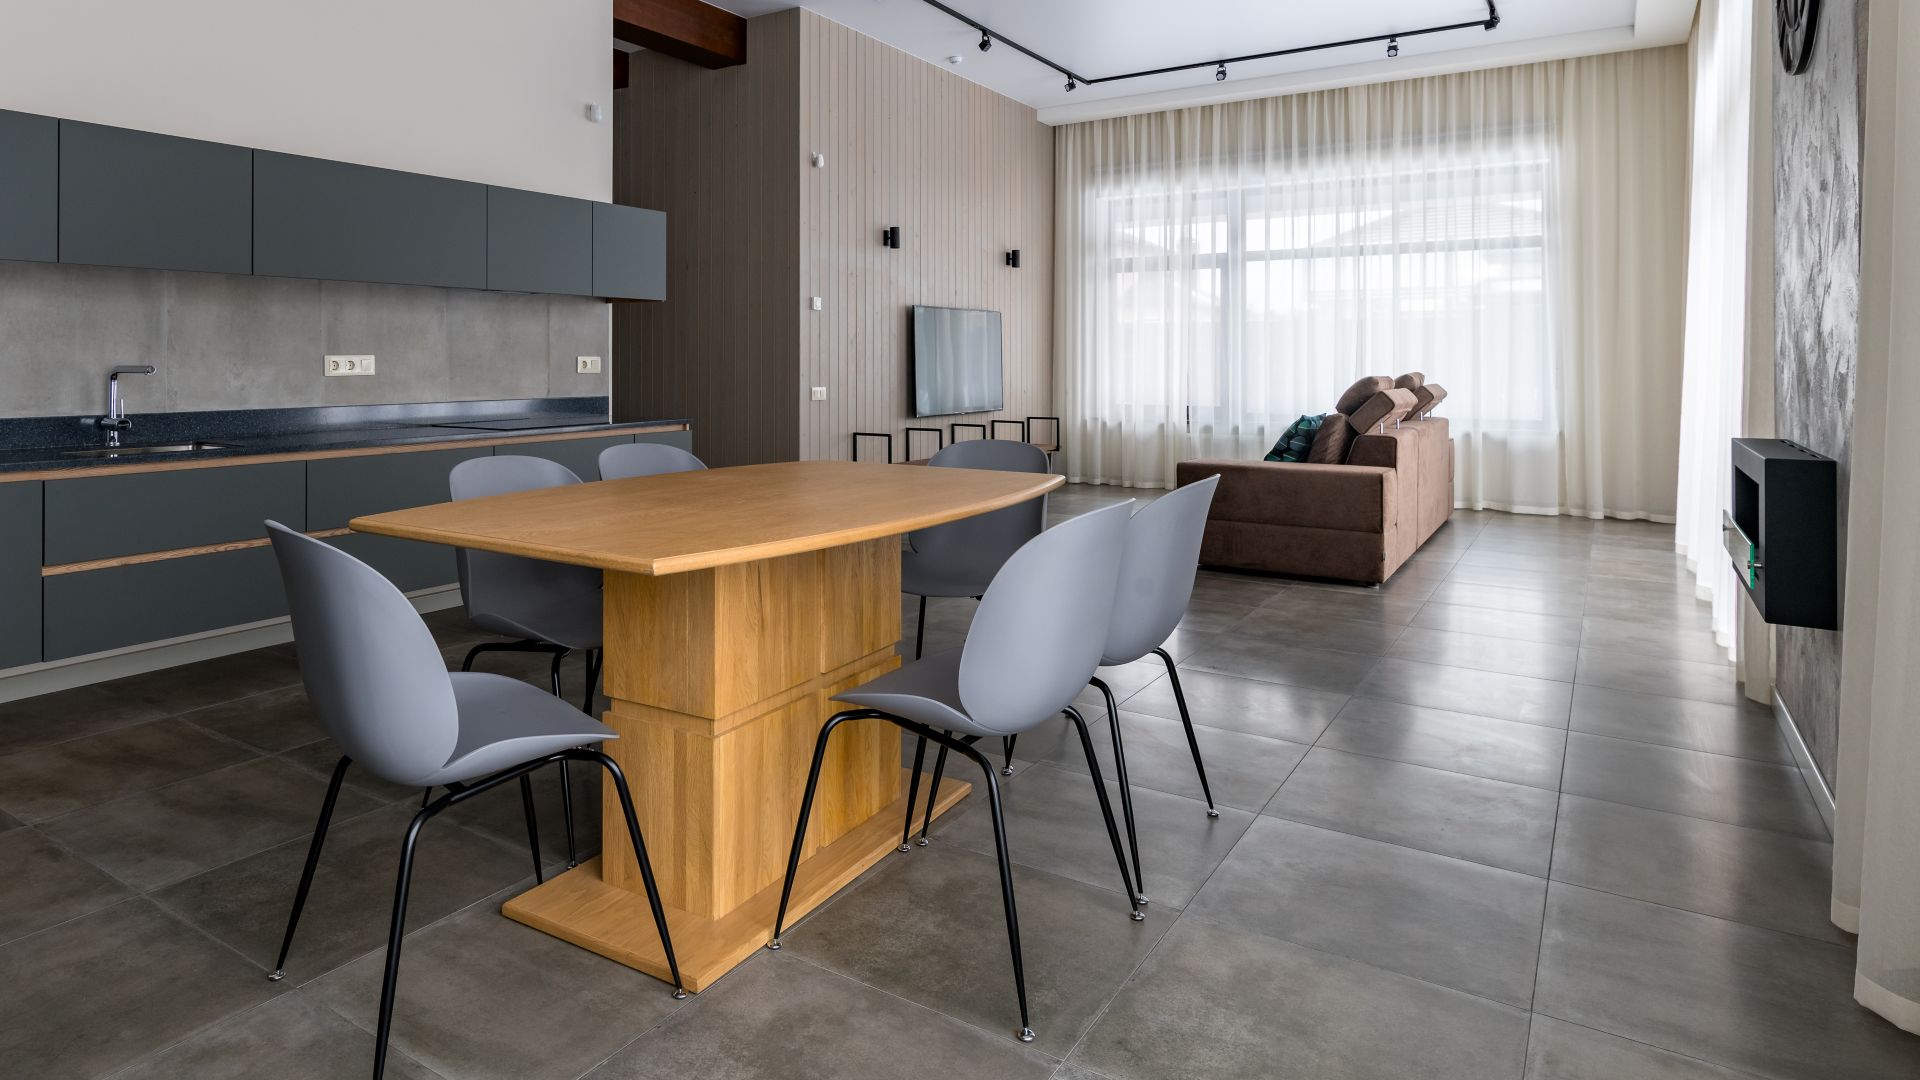 Grey kitchen furniture. Built-in household techie. Black with a gold chandelier over the table. panoramic windows. Light interior. Ceiling sweats. Modern furniture for the dining room.